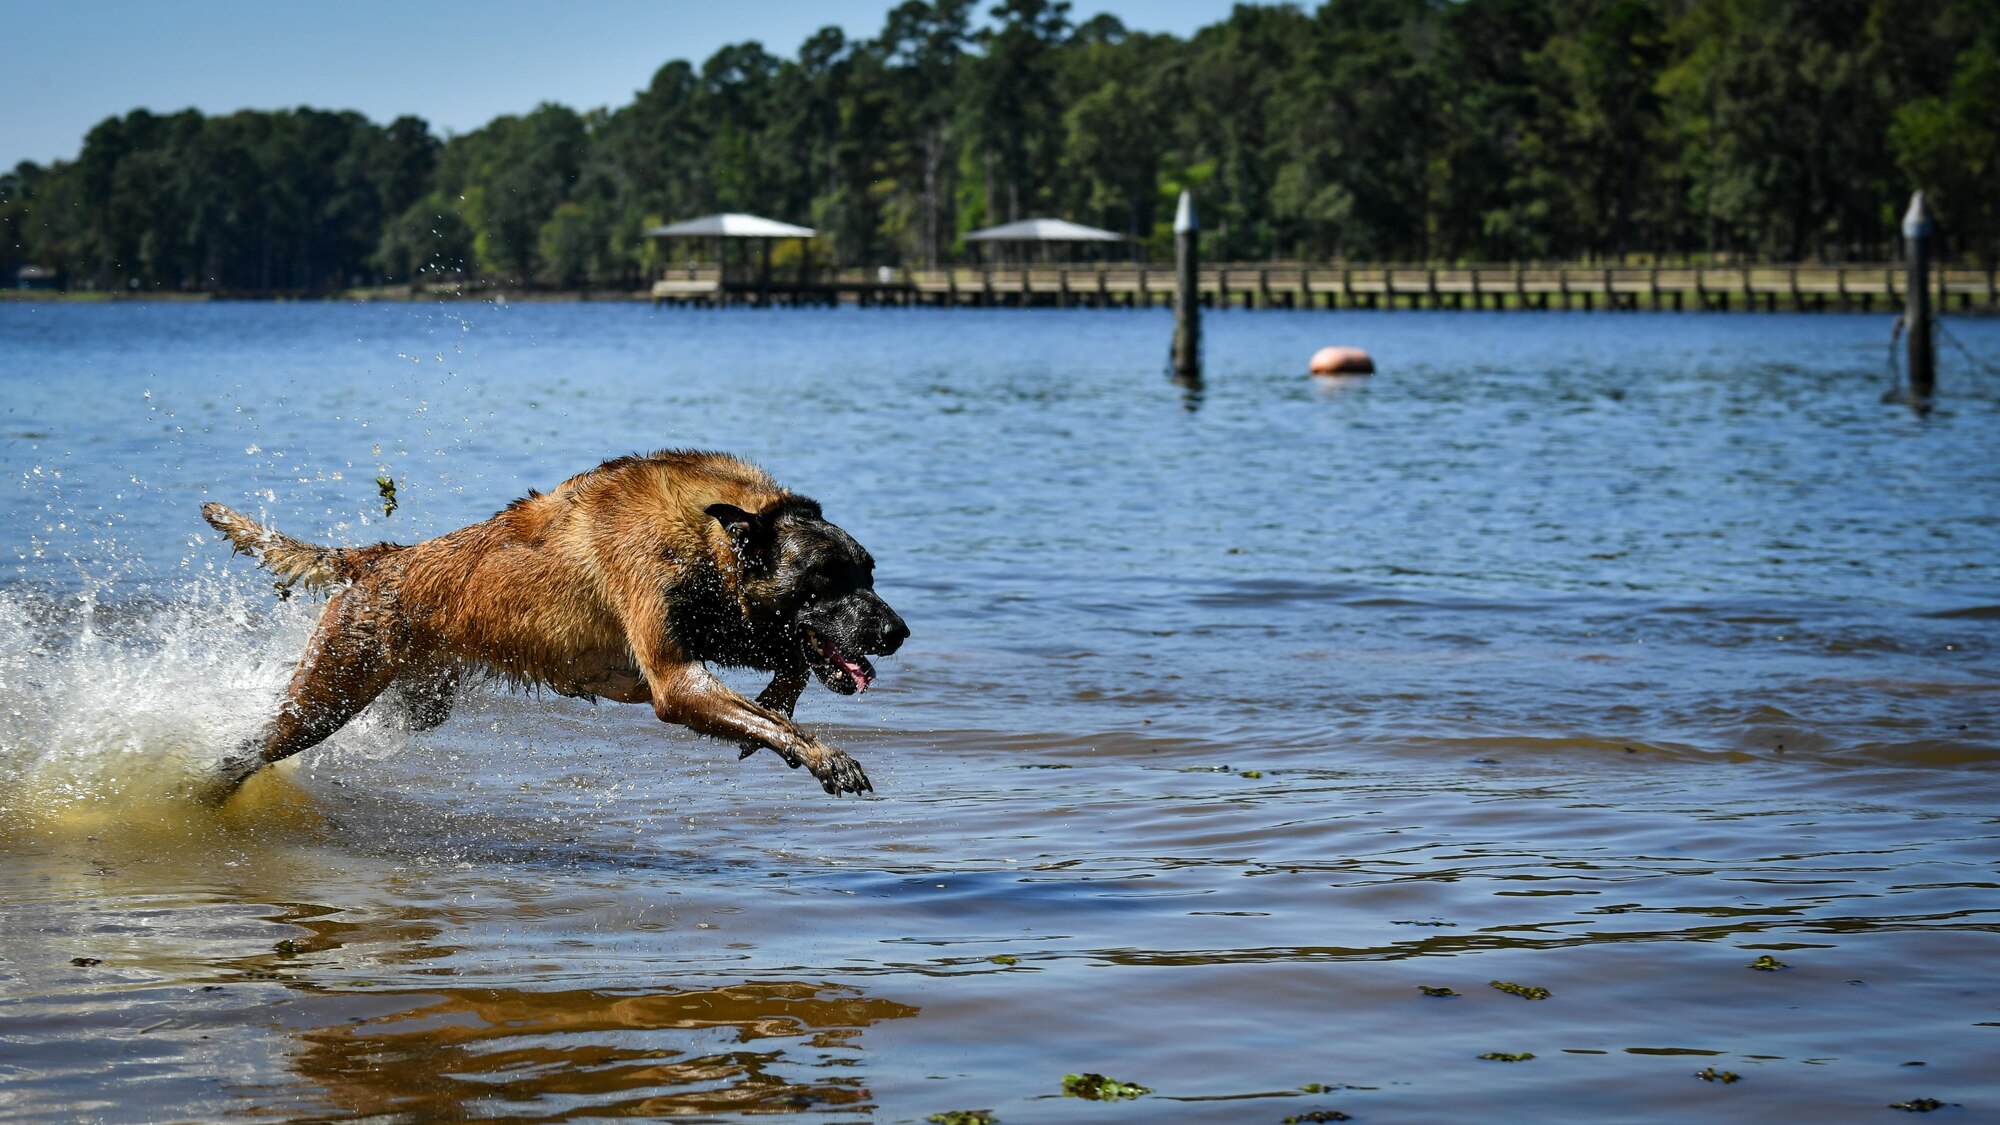 Vvelma, a 2nd Security Forces Squadron military working dog, sprints in the Black Bayou Lake during a water aggression training session in Benton, La., Sept. 6, 2017. MWDs took turns conducting various types of training drills in the lake